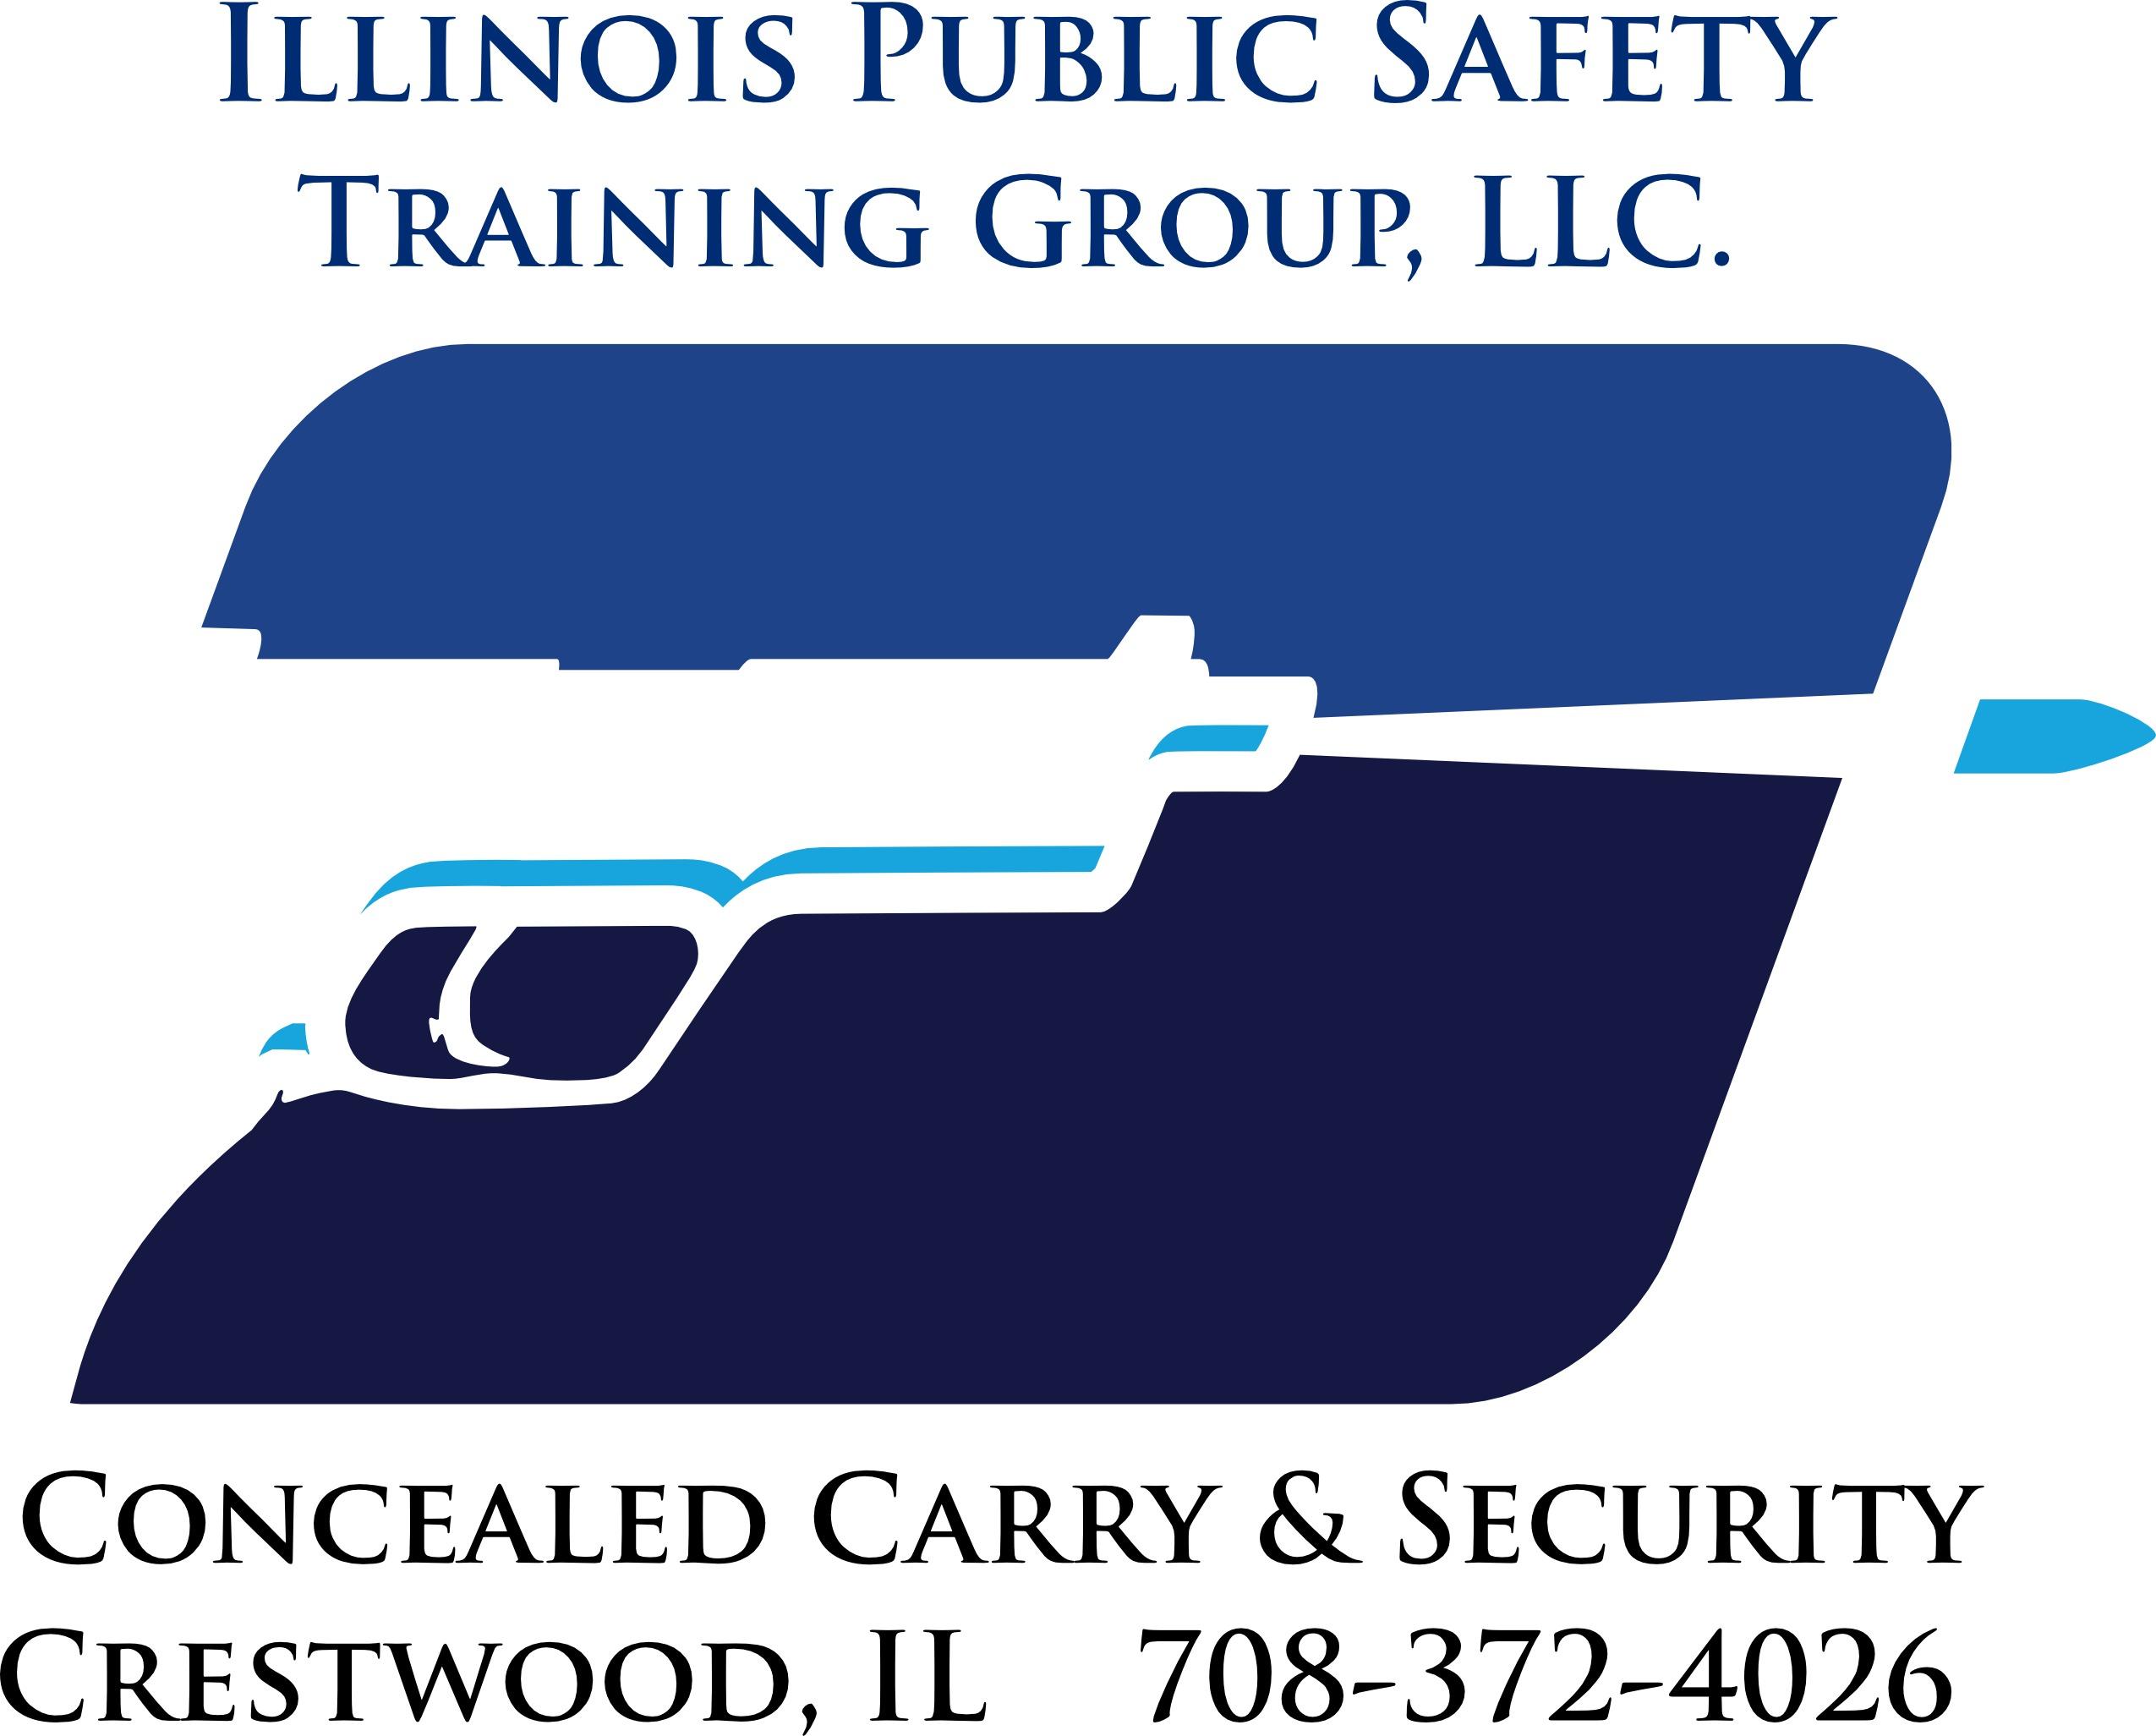 WEEKNIGHT CLASS 6 -10 PM IL & FL Concealed Carry Class $75 16 Hour&Range 